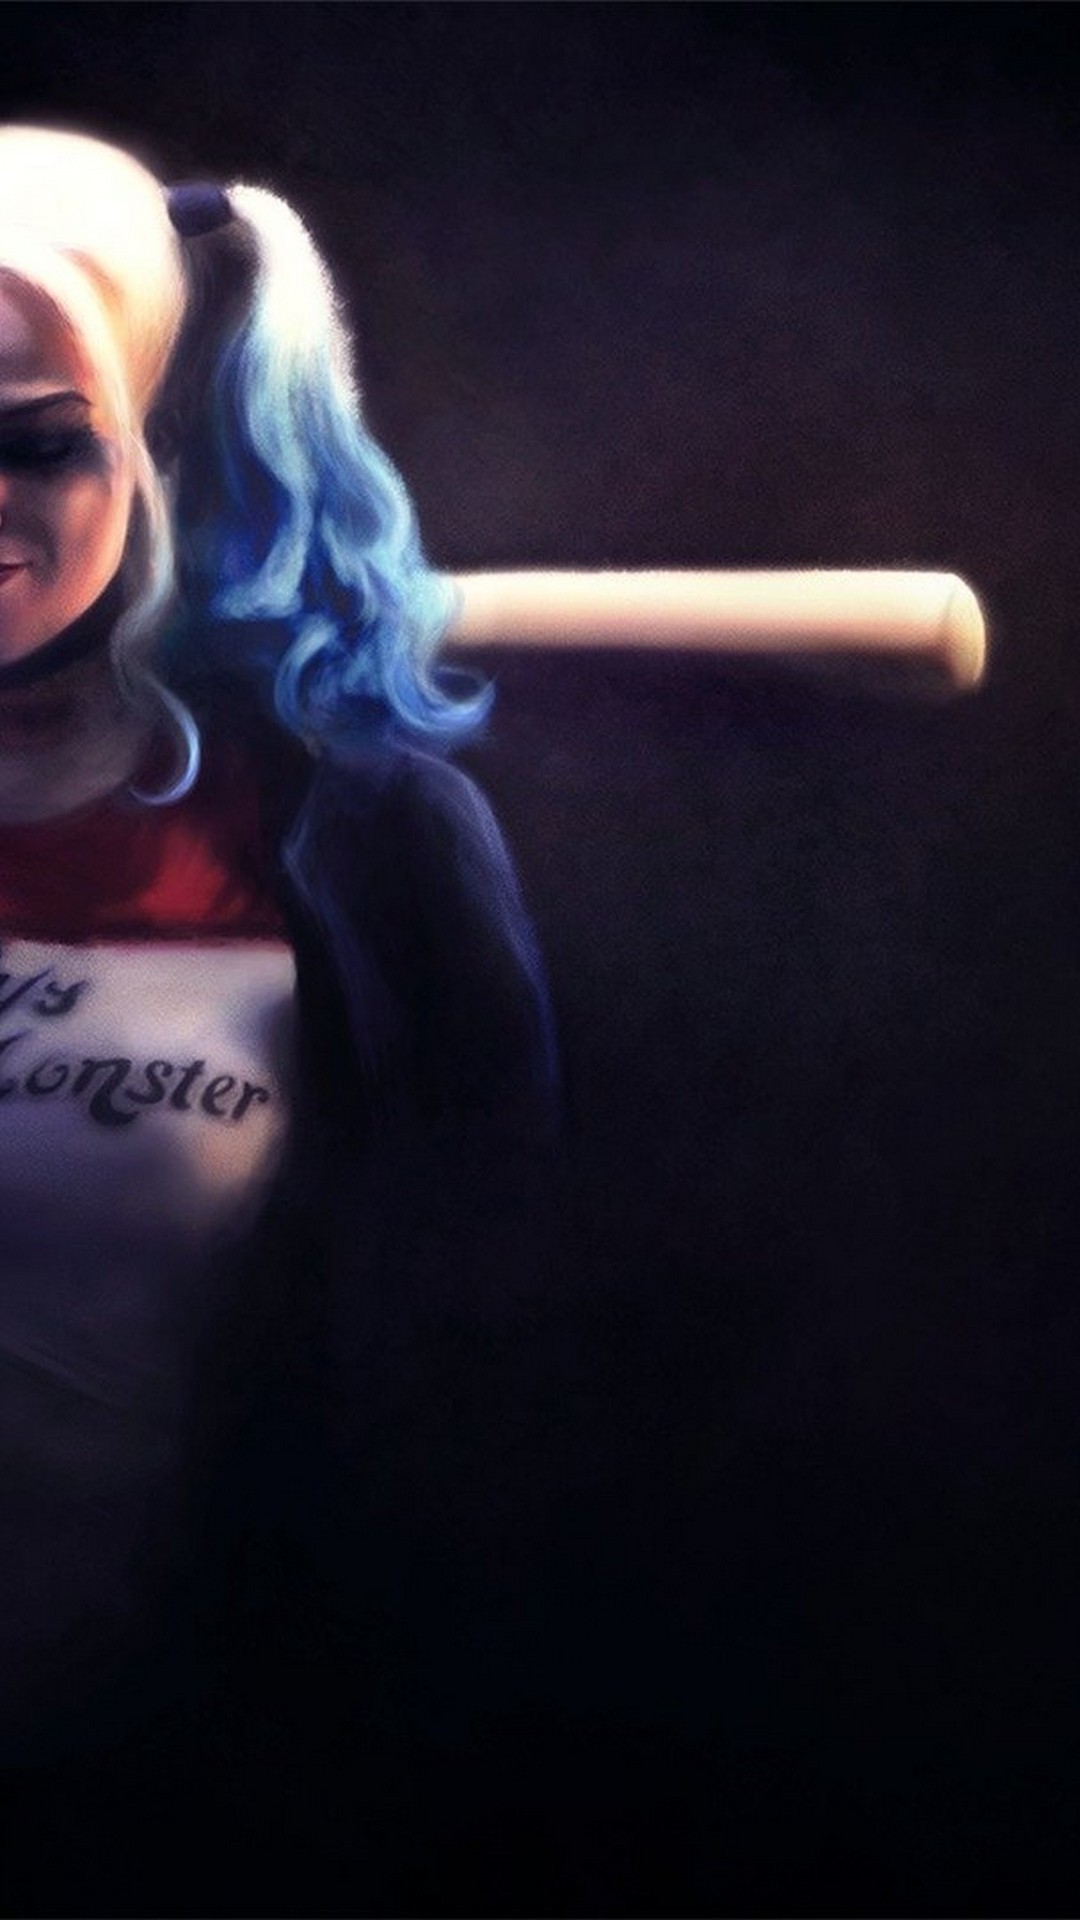 iPhone Wallpaper Pictures Of Harley Quinn with resolution 1080X1920 pixel. You can make this wallpaper for your iPhone 5, 6, 7, 8, X backgrounds, Mobile Screensaver, or iPad Lock Screen